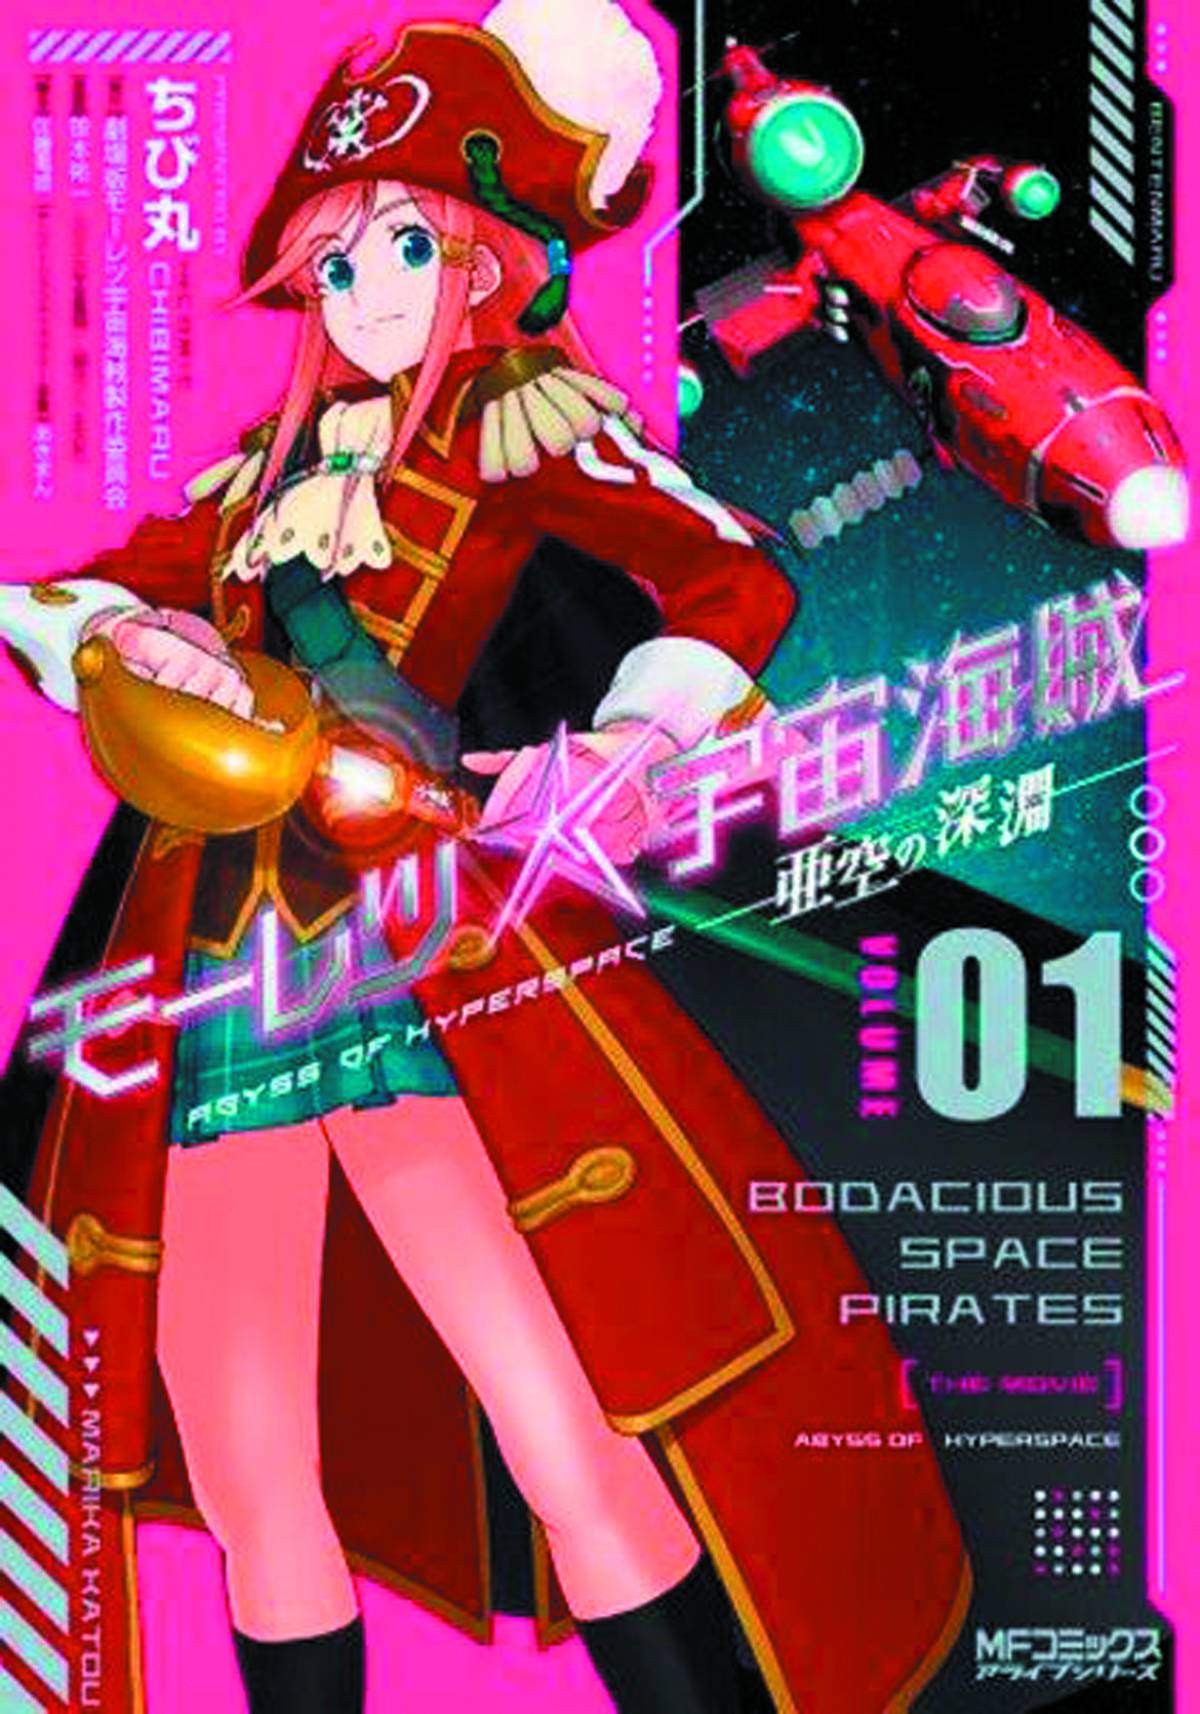 Bodacious Space Pirates Abyss of Hyperspace Manga Volume 1